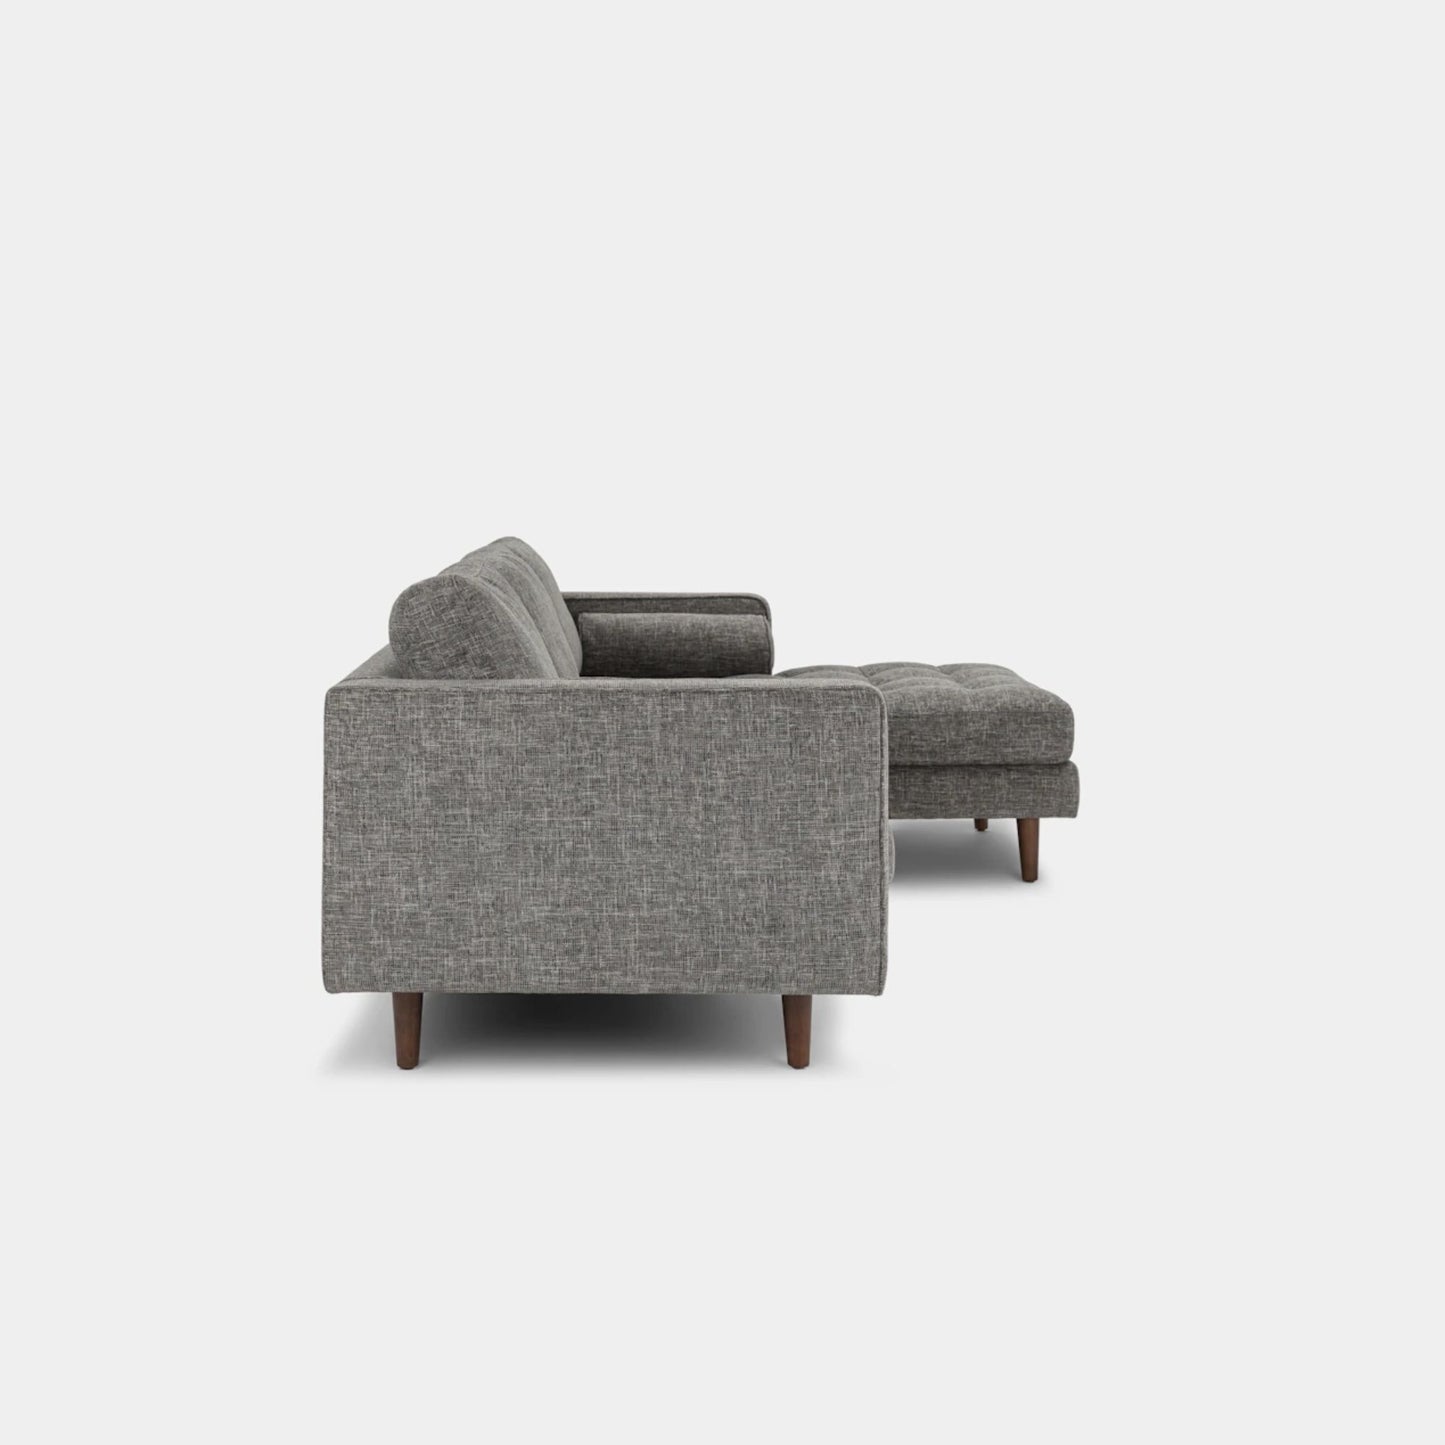 Castle fabric sectional sofa right grey